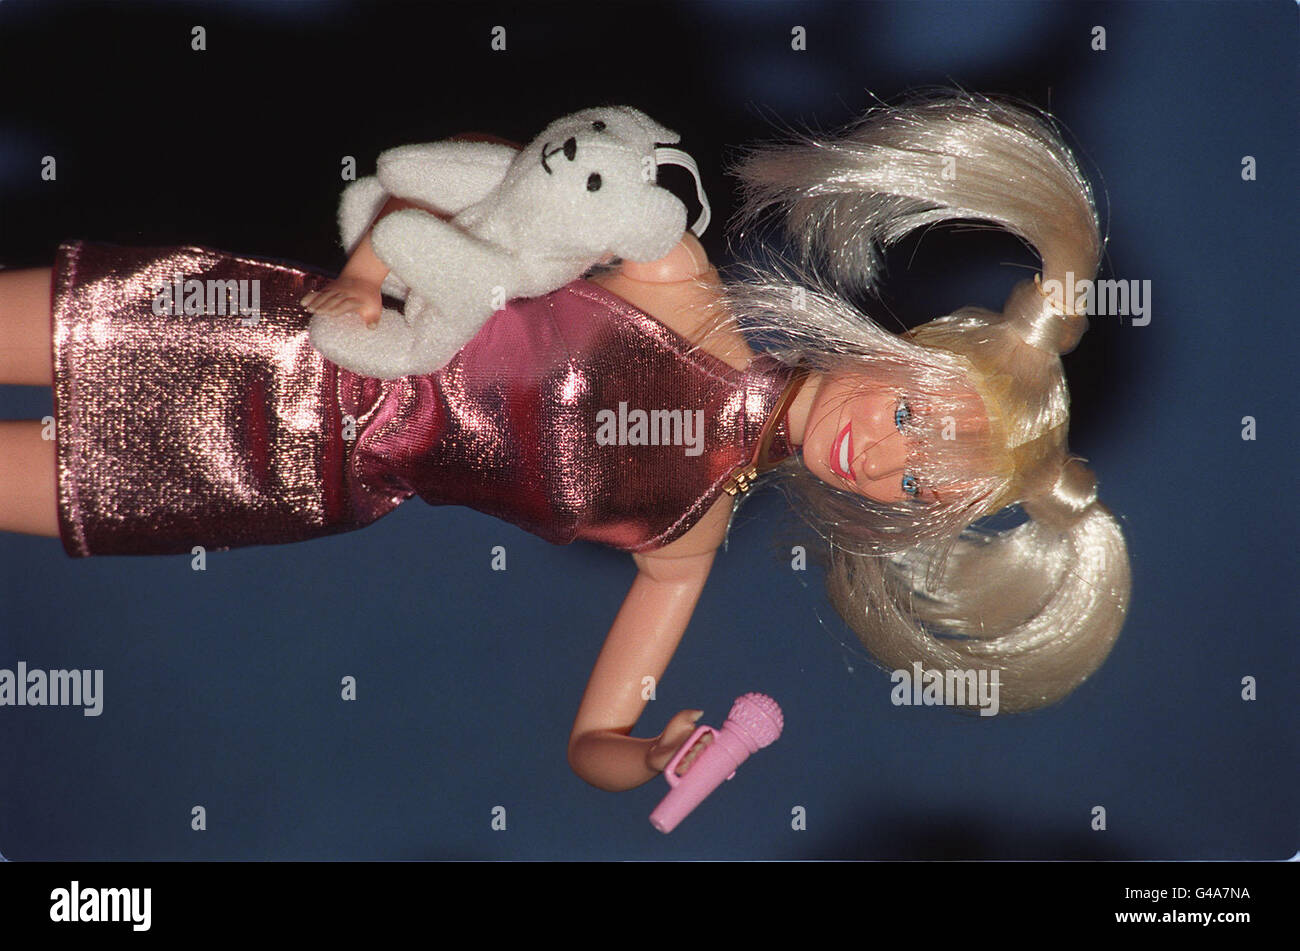 Baby Spice doll, complete with cuddly toy. The long-awaited figurines of all five Spice dolls were revealed in all their glory at a fair of Christmas toys, with as much hype as if the famous five themselves were making an appearance, today (Thursday). Photo by Ben Curtis. Stock Photo